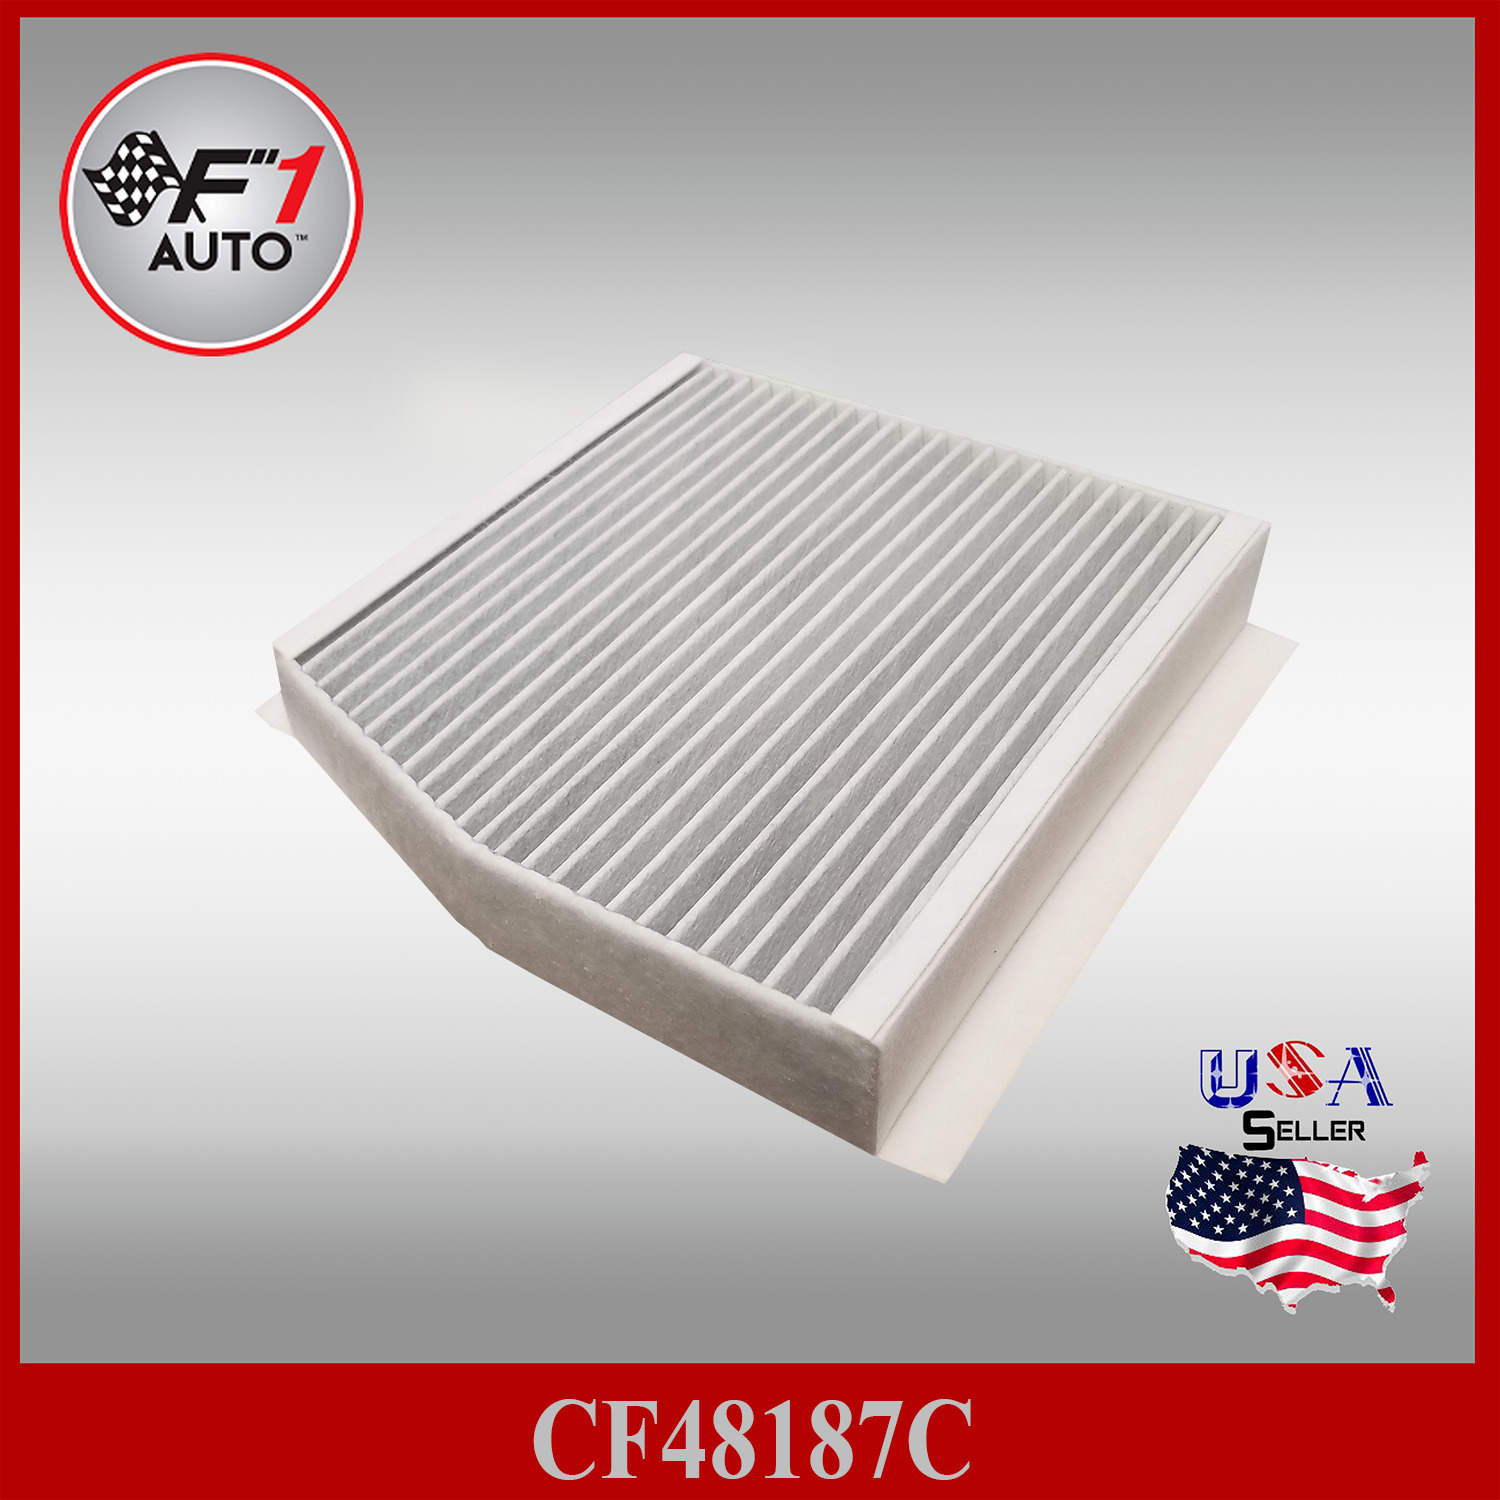 CF48187C Cabin Air Filter for Mercedes 2014-2016 GLA200 & 2014-2015 A45 AMG